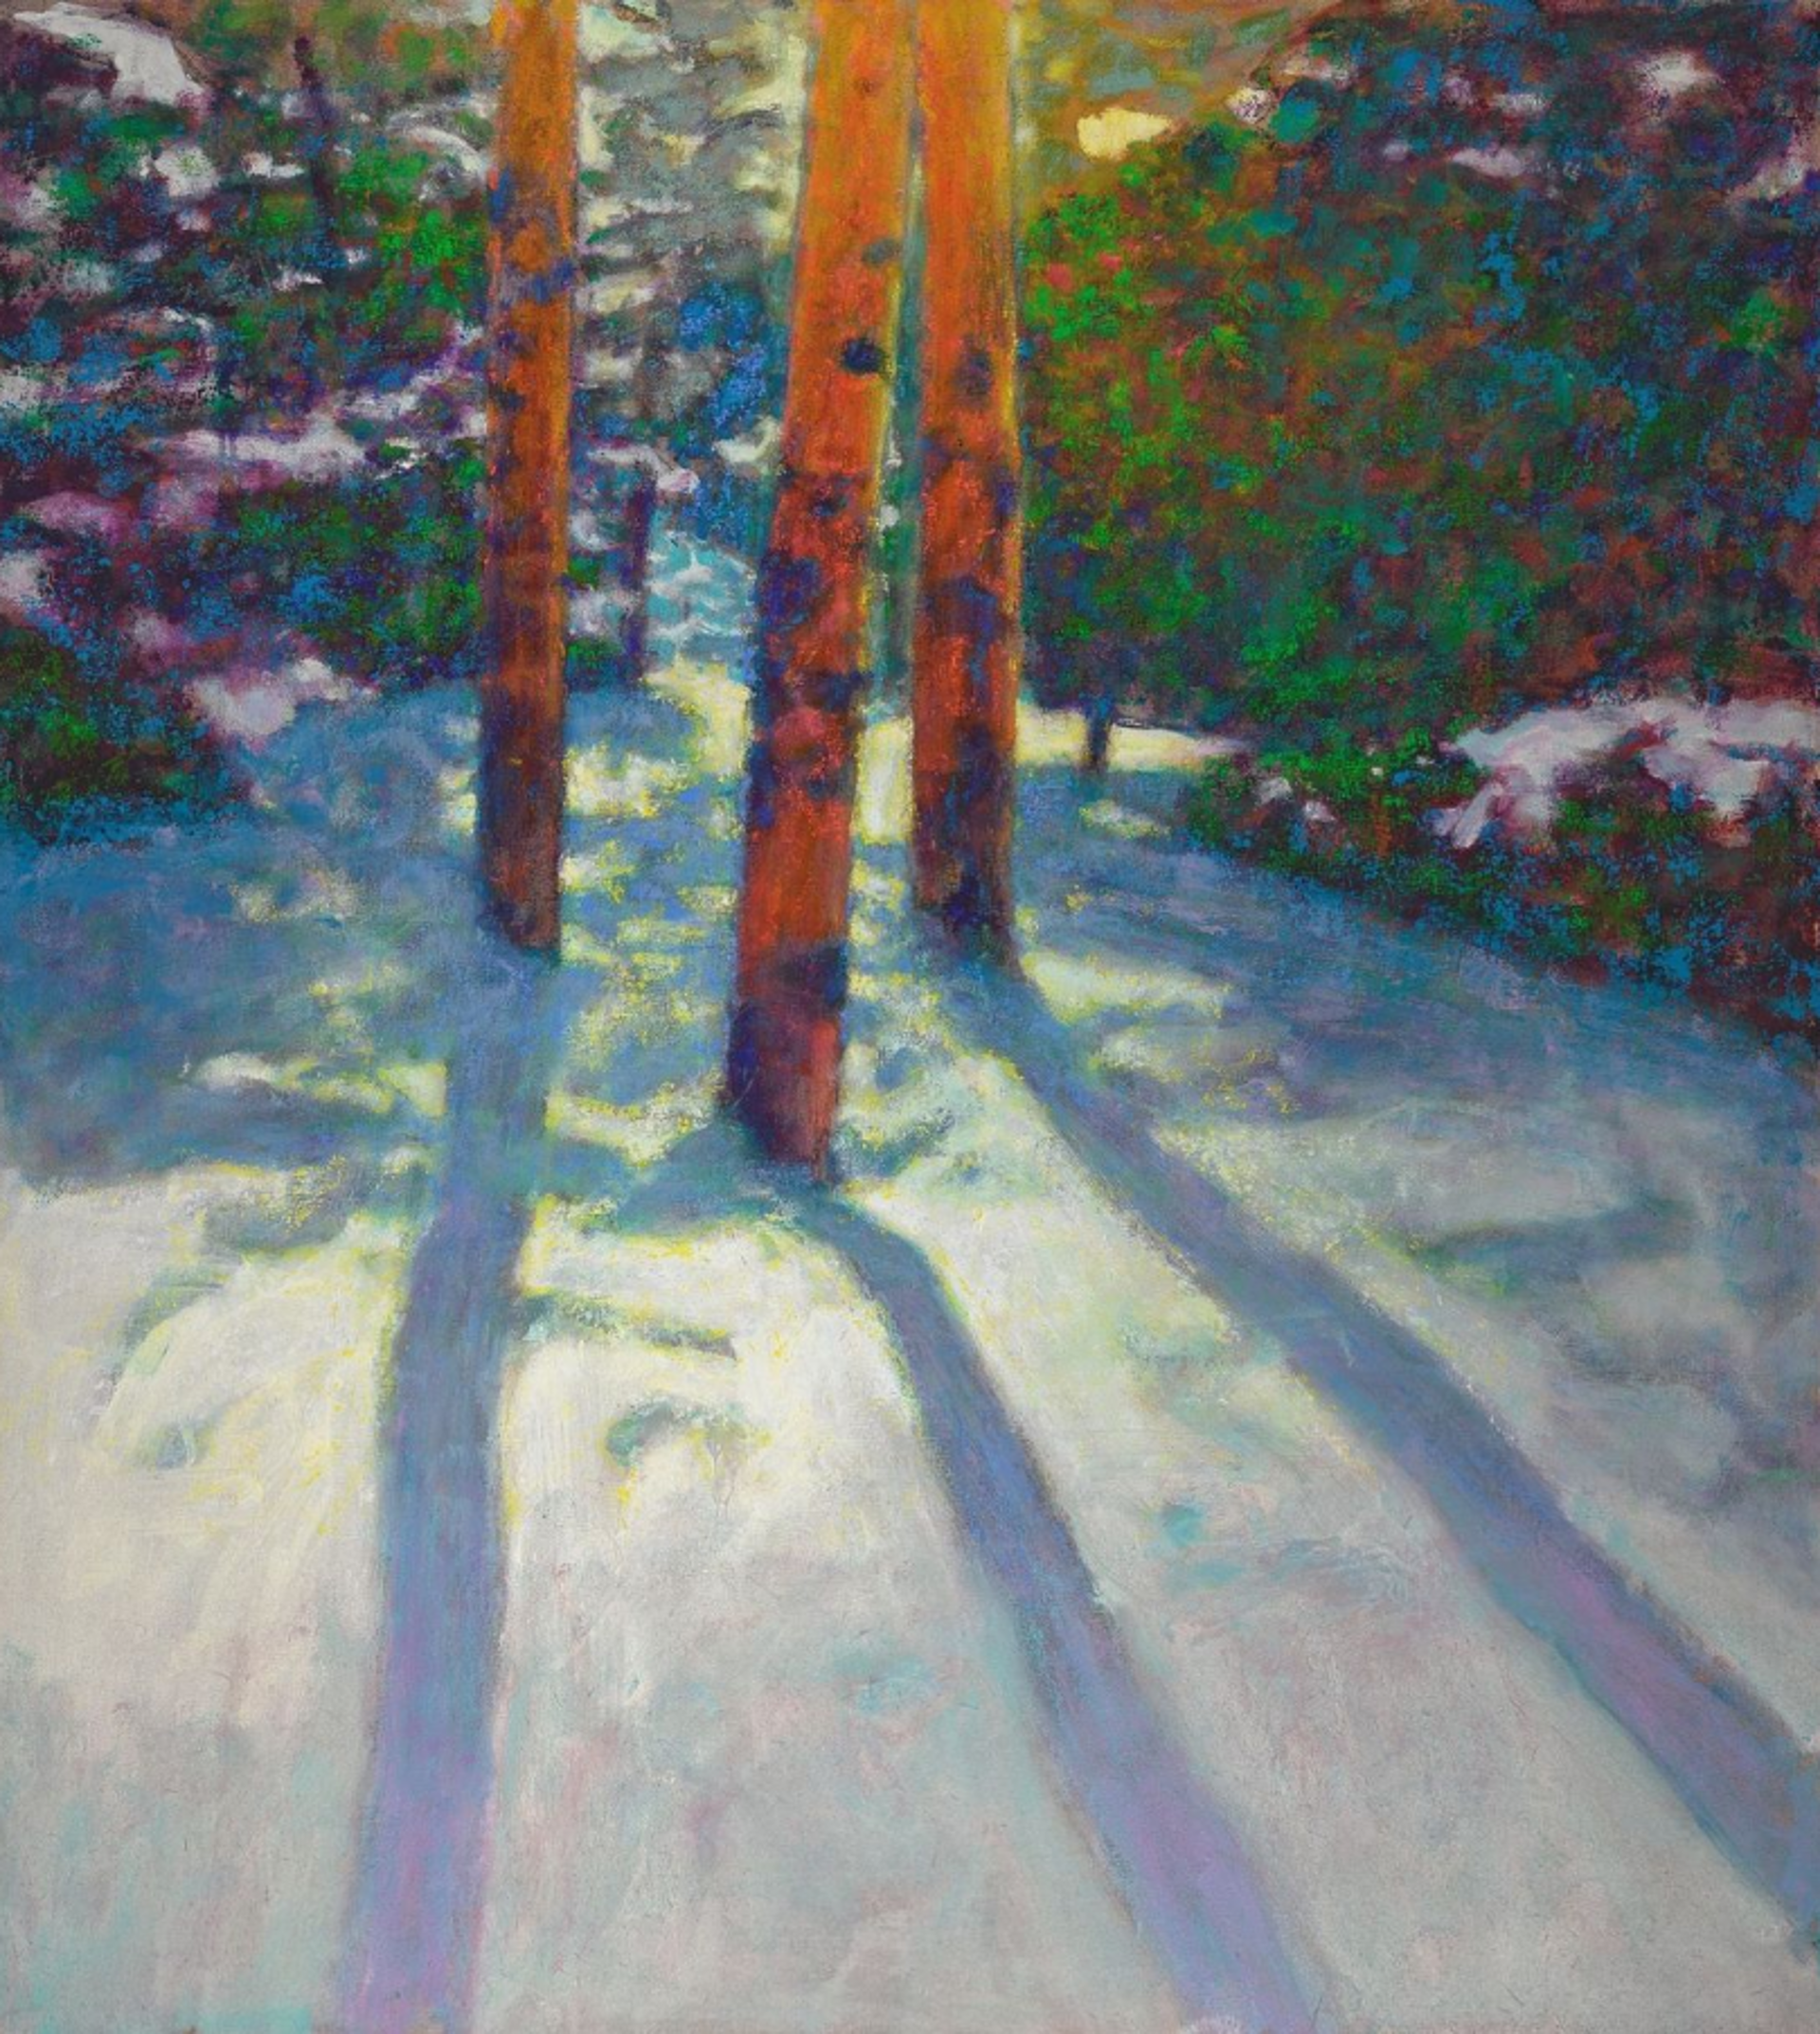 Three Red Trees in a Snowy Landscape by Richard Stevens